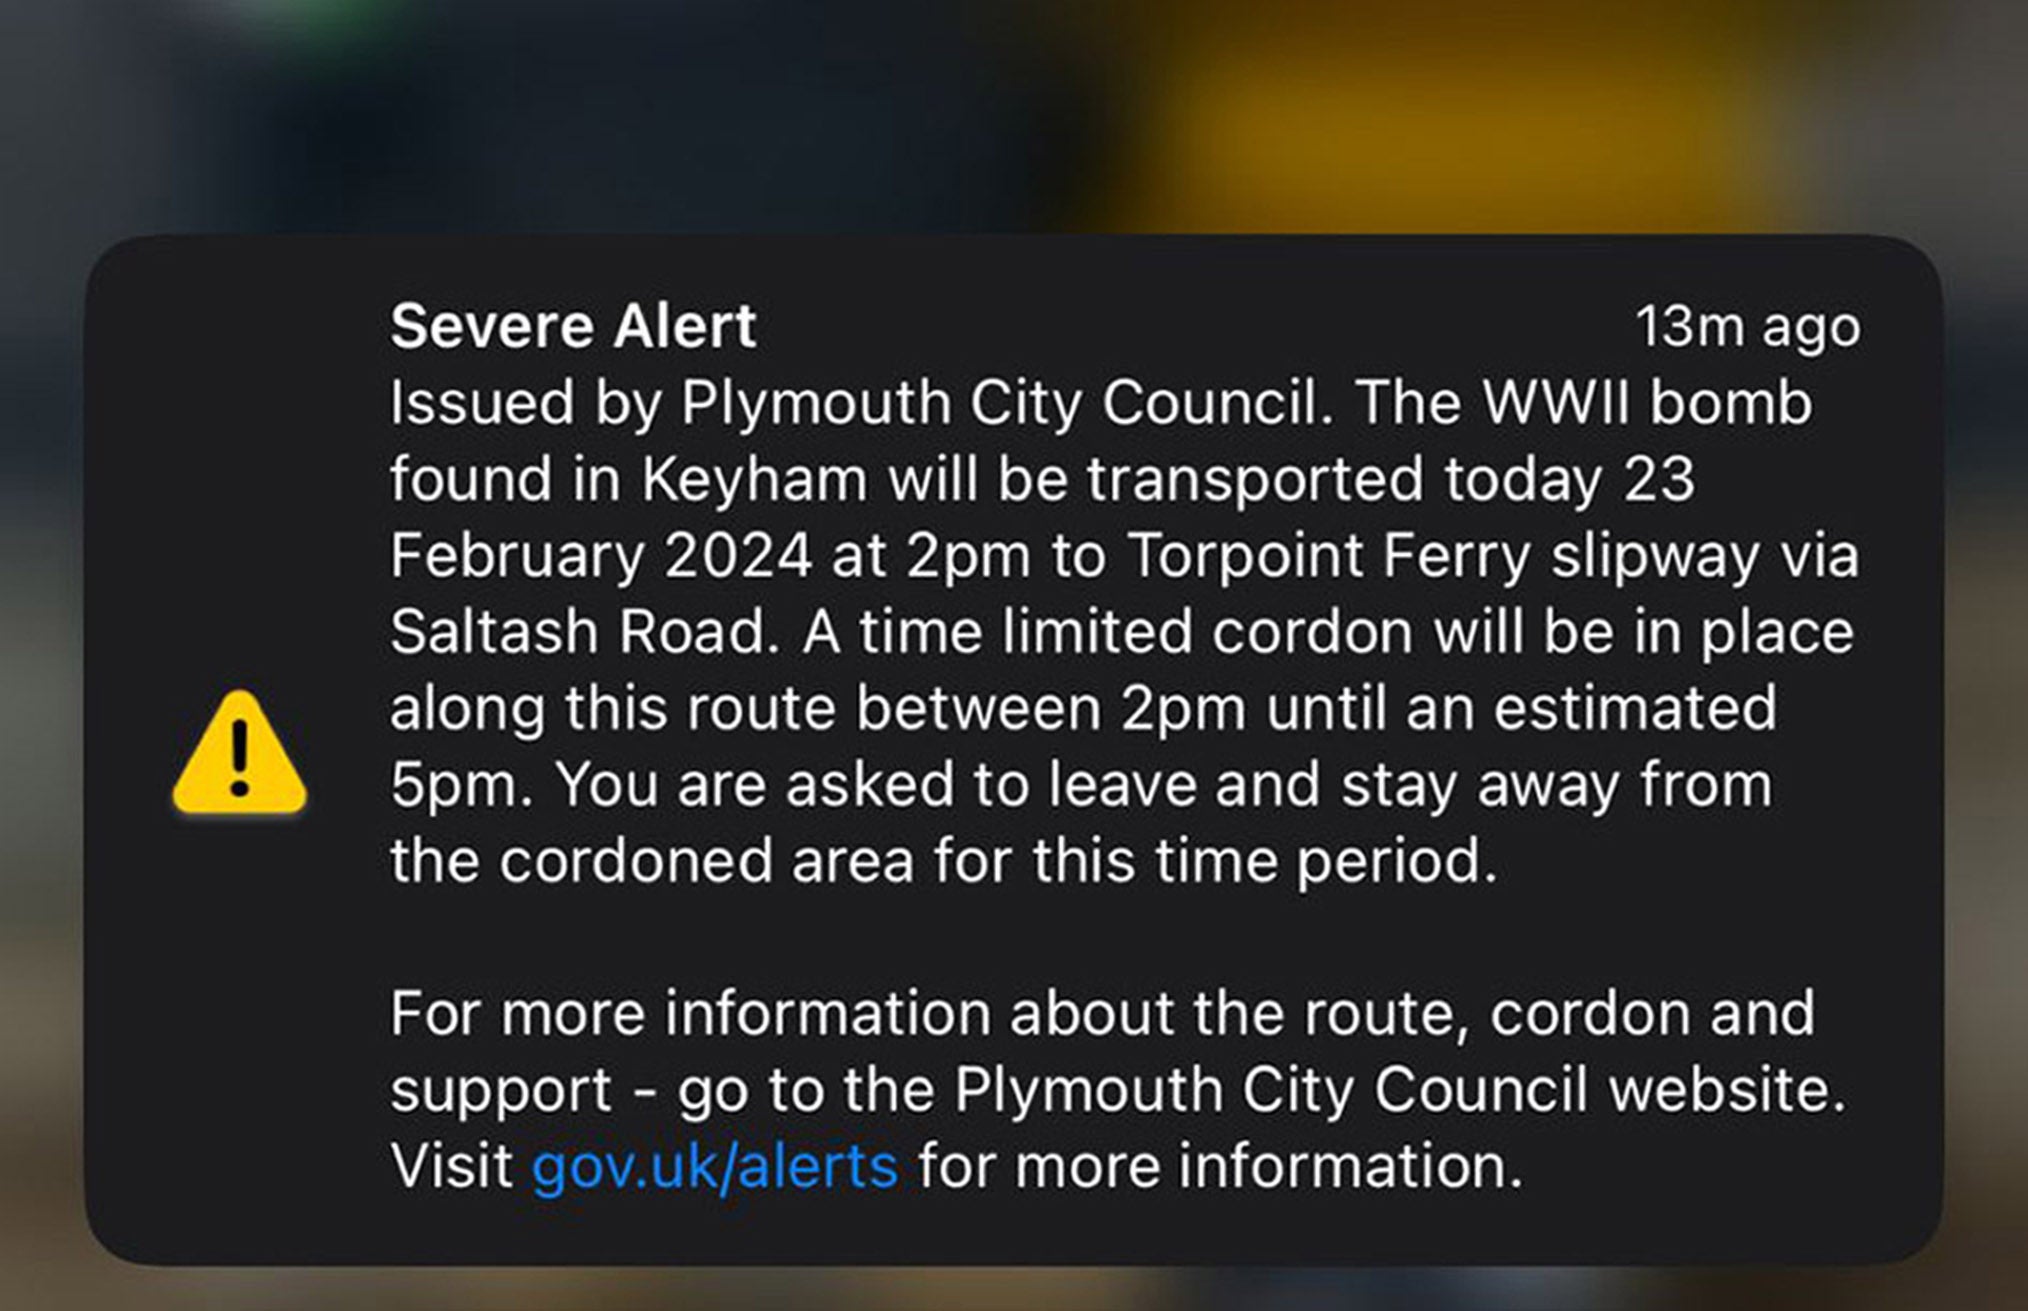 The Severe Alert text message sent to local resident